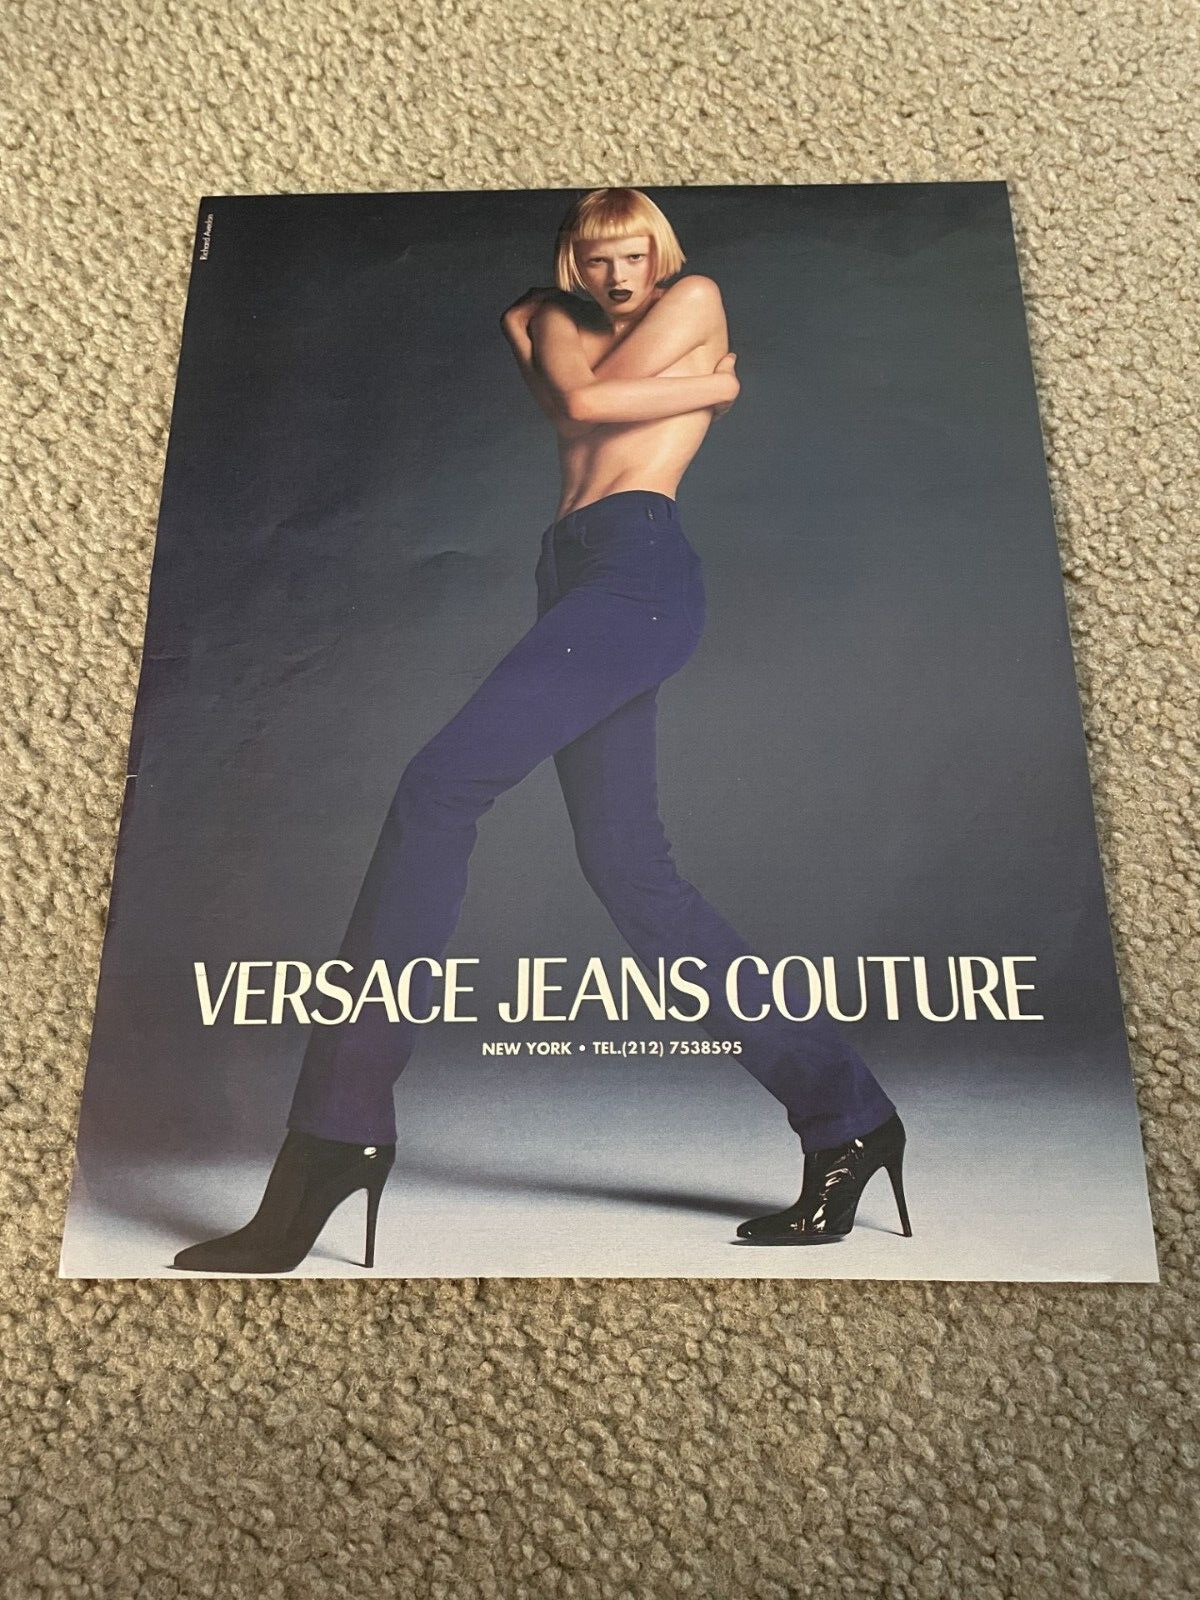 Vintage 1997 GIANNI VERSACE JEANS COUTURE Print Ad 1990s SHIRTLESS FEMALE MODEL